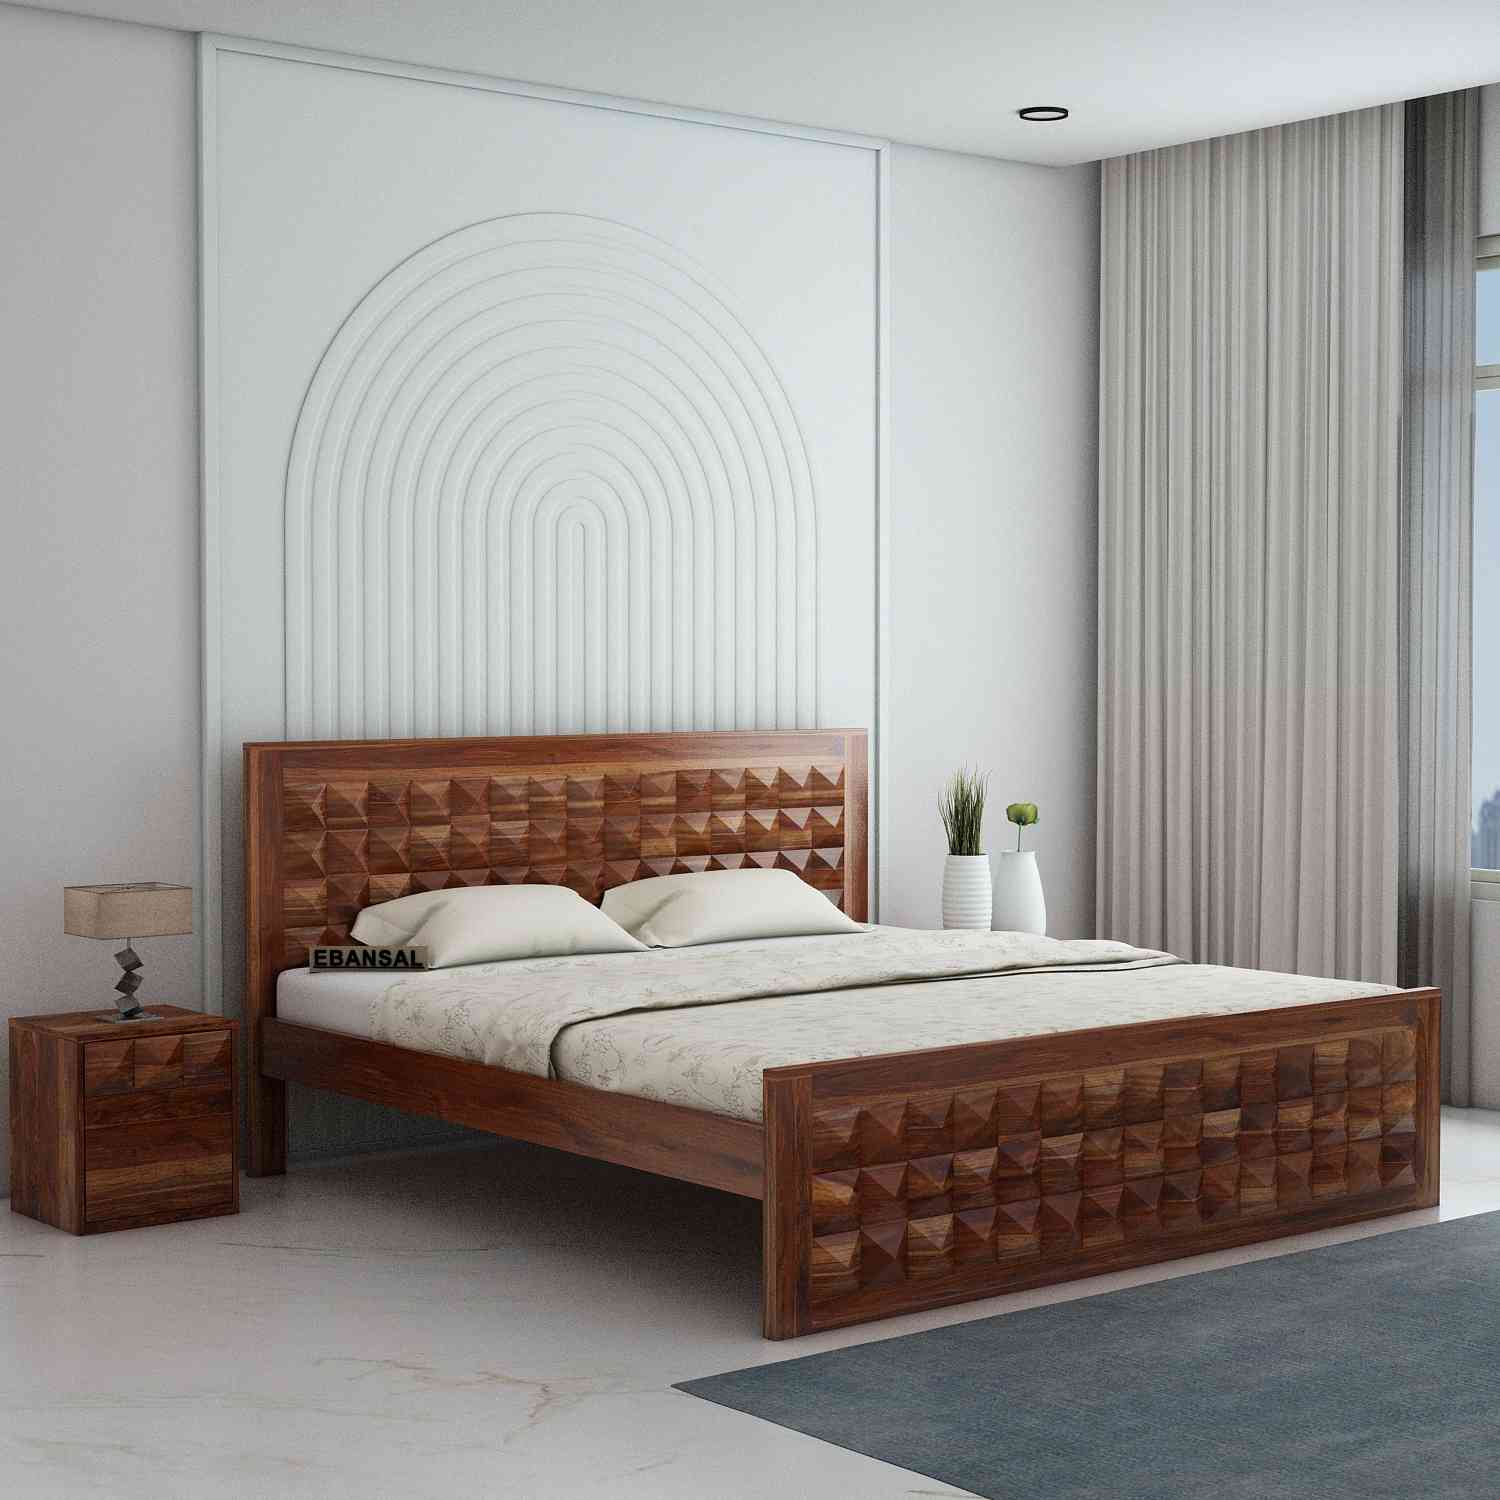 Sofia Solid Sheesham Wood Bed Without Storage (Queen Size, Natural Finish)